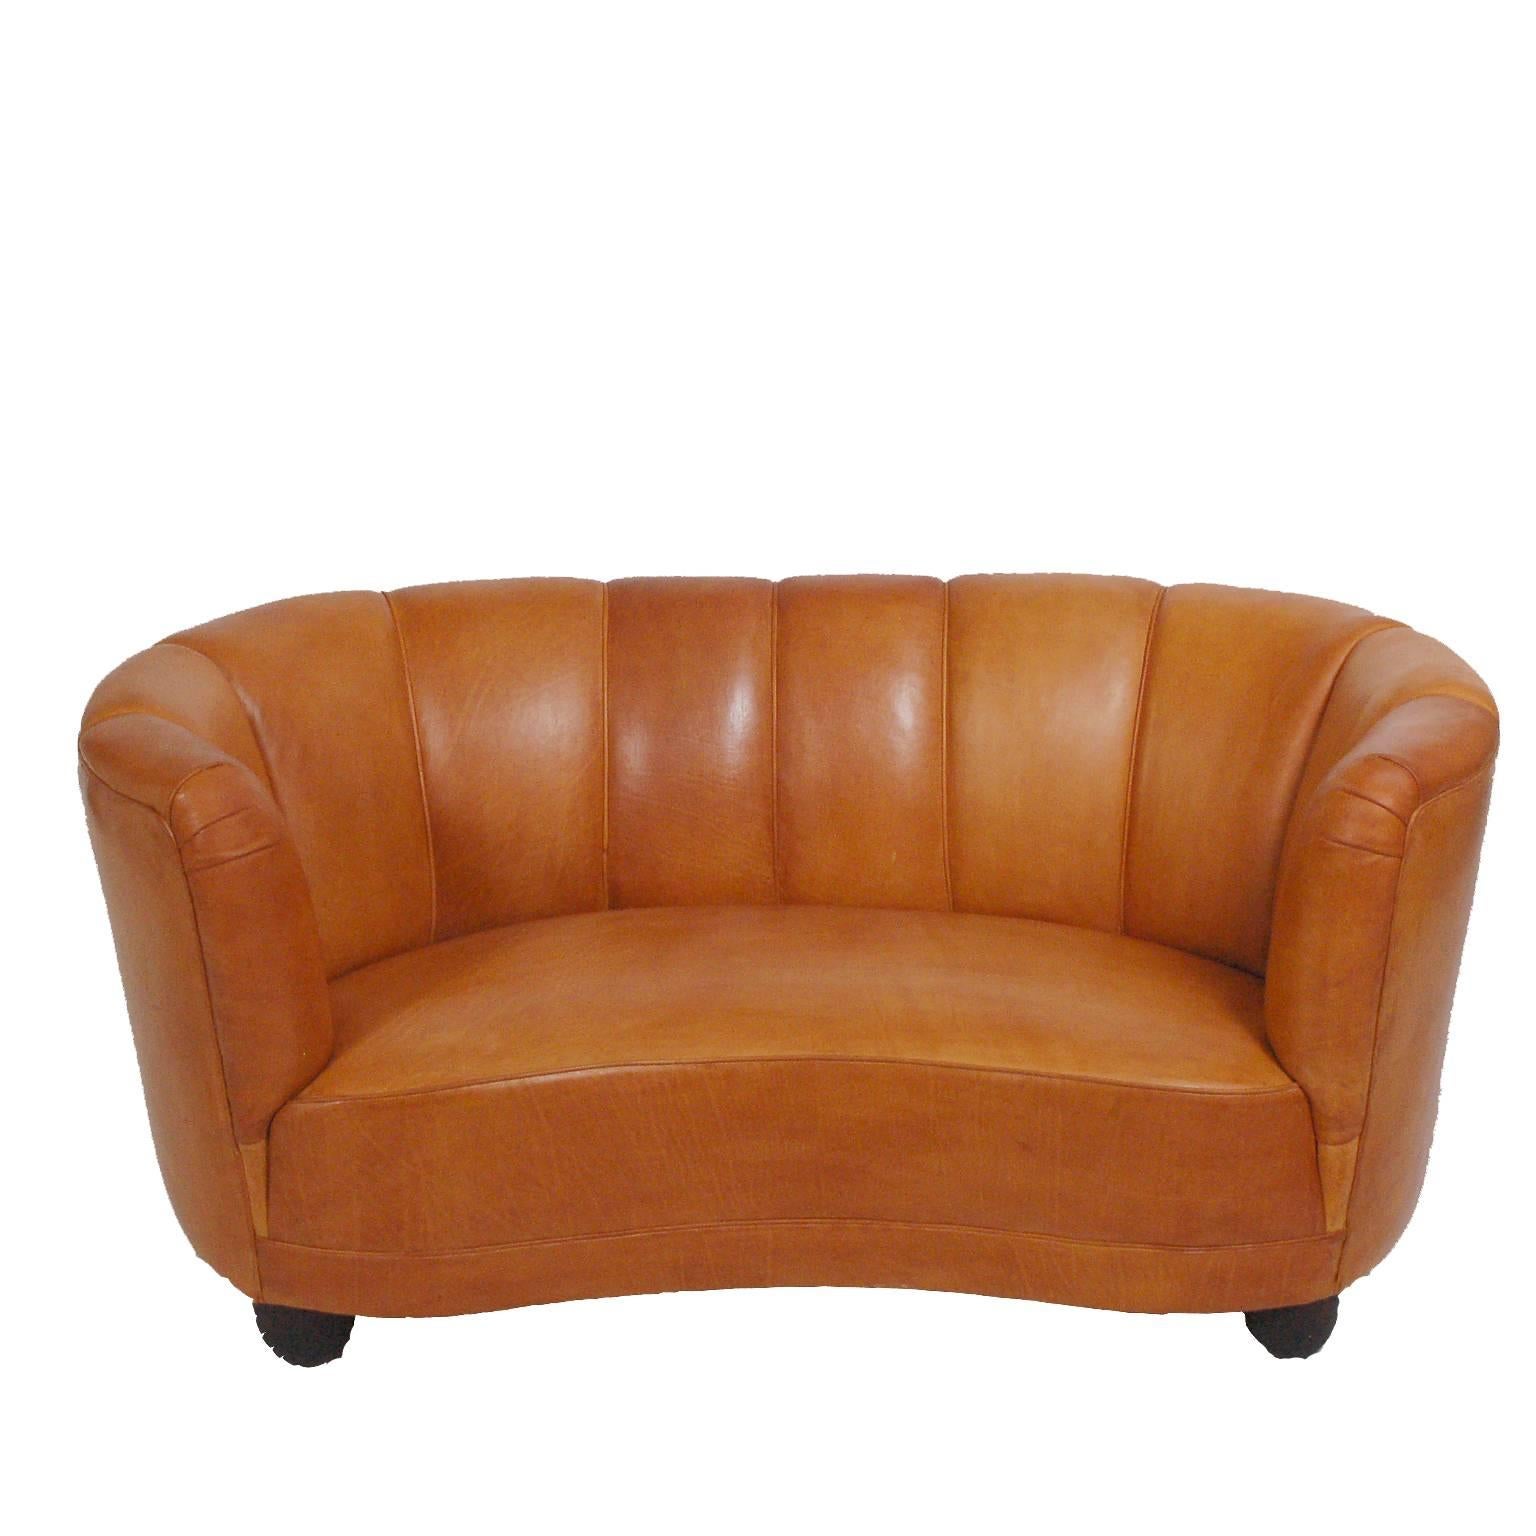 Free-form two-seat sofa and easy chair newly upholstered in natural leather. Design attributed to Flemming Lassen.
Chair size 35 D" W x 33" D x 27" H x 15" SH.
Can be sold separately.